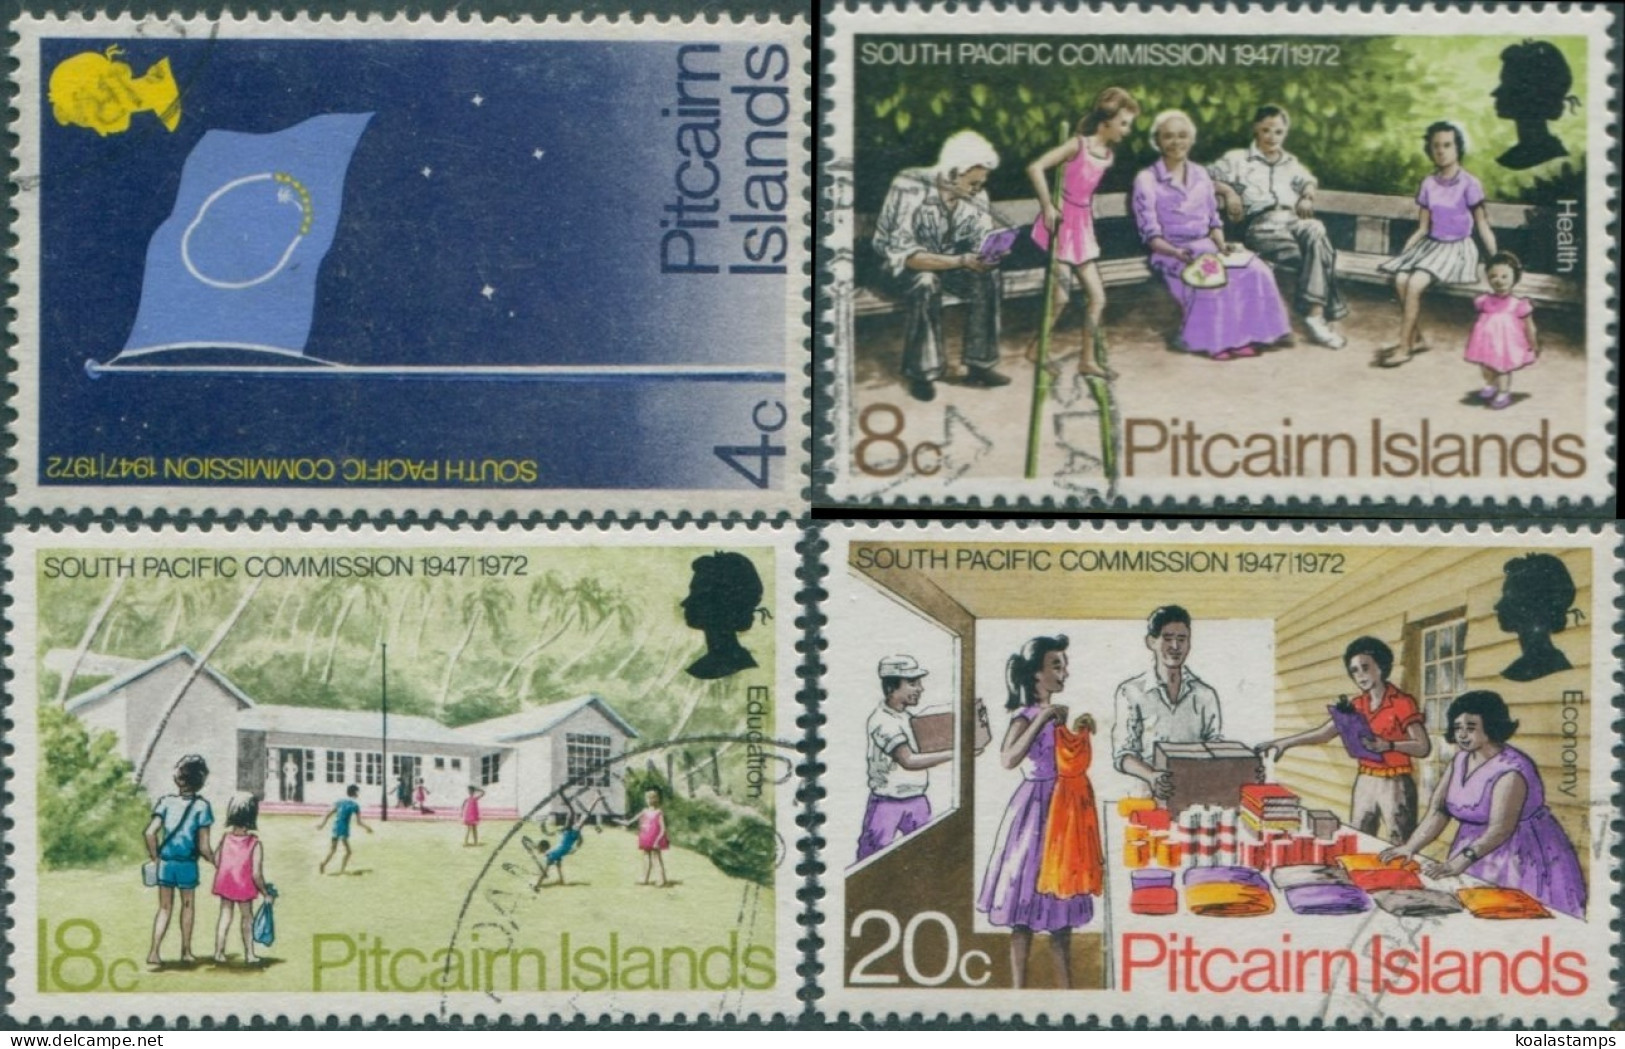 Pitcairn Islands 1972 SG120-123 South Pacific Commission Set FU - Pitcairn